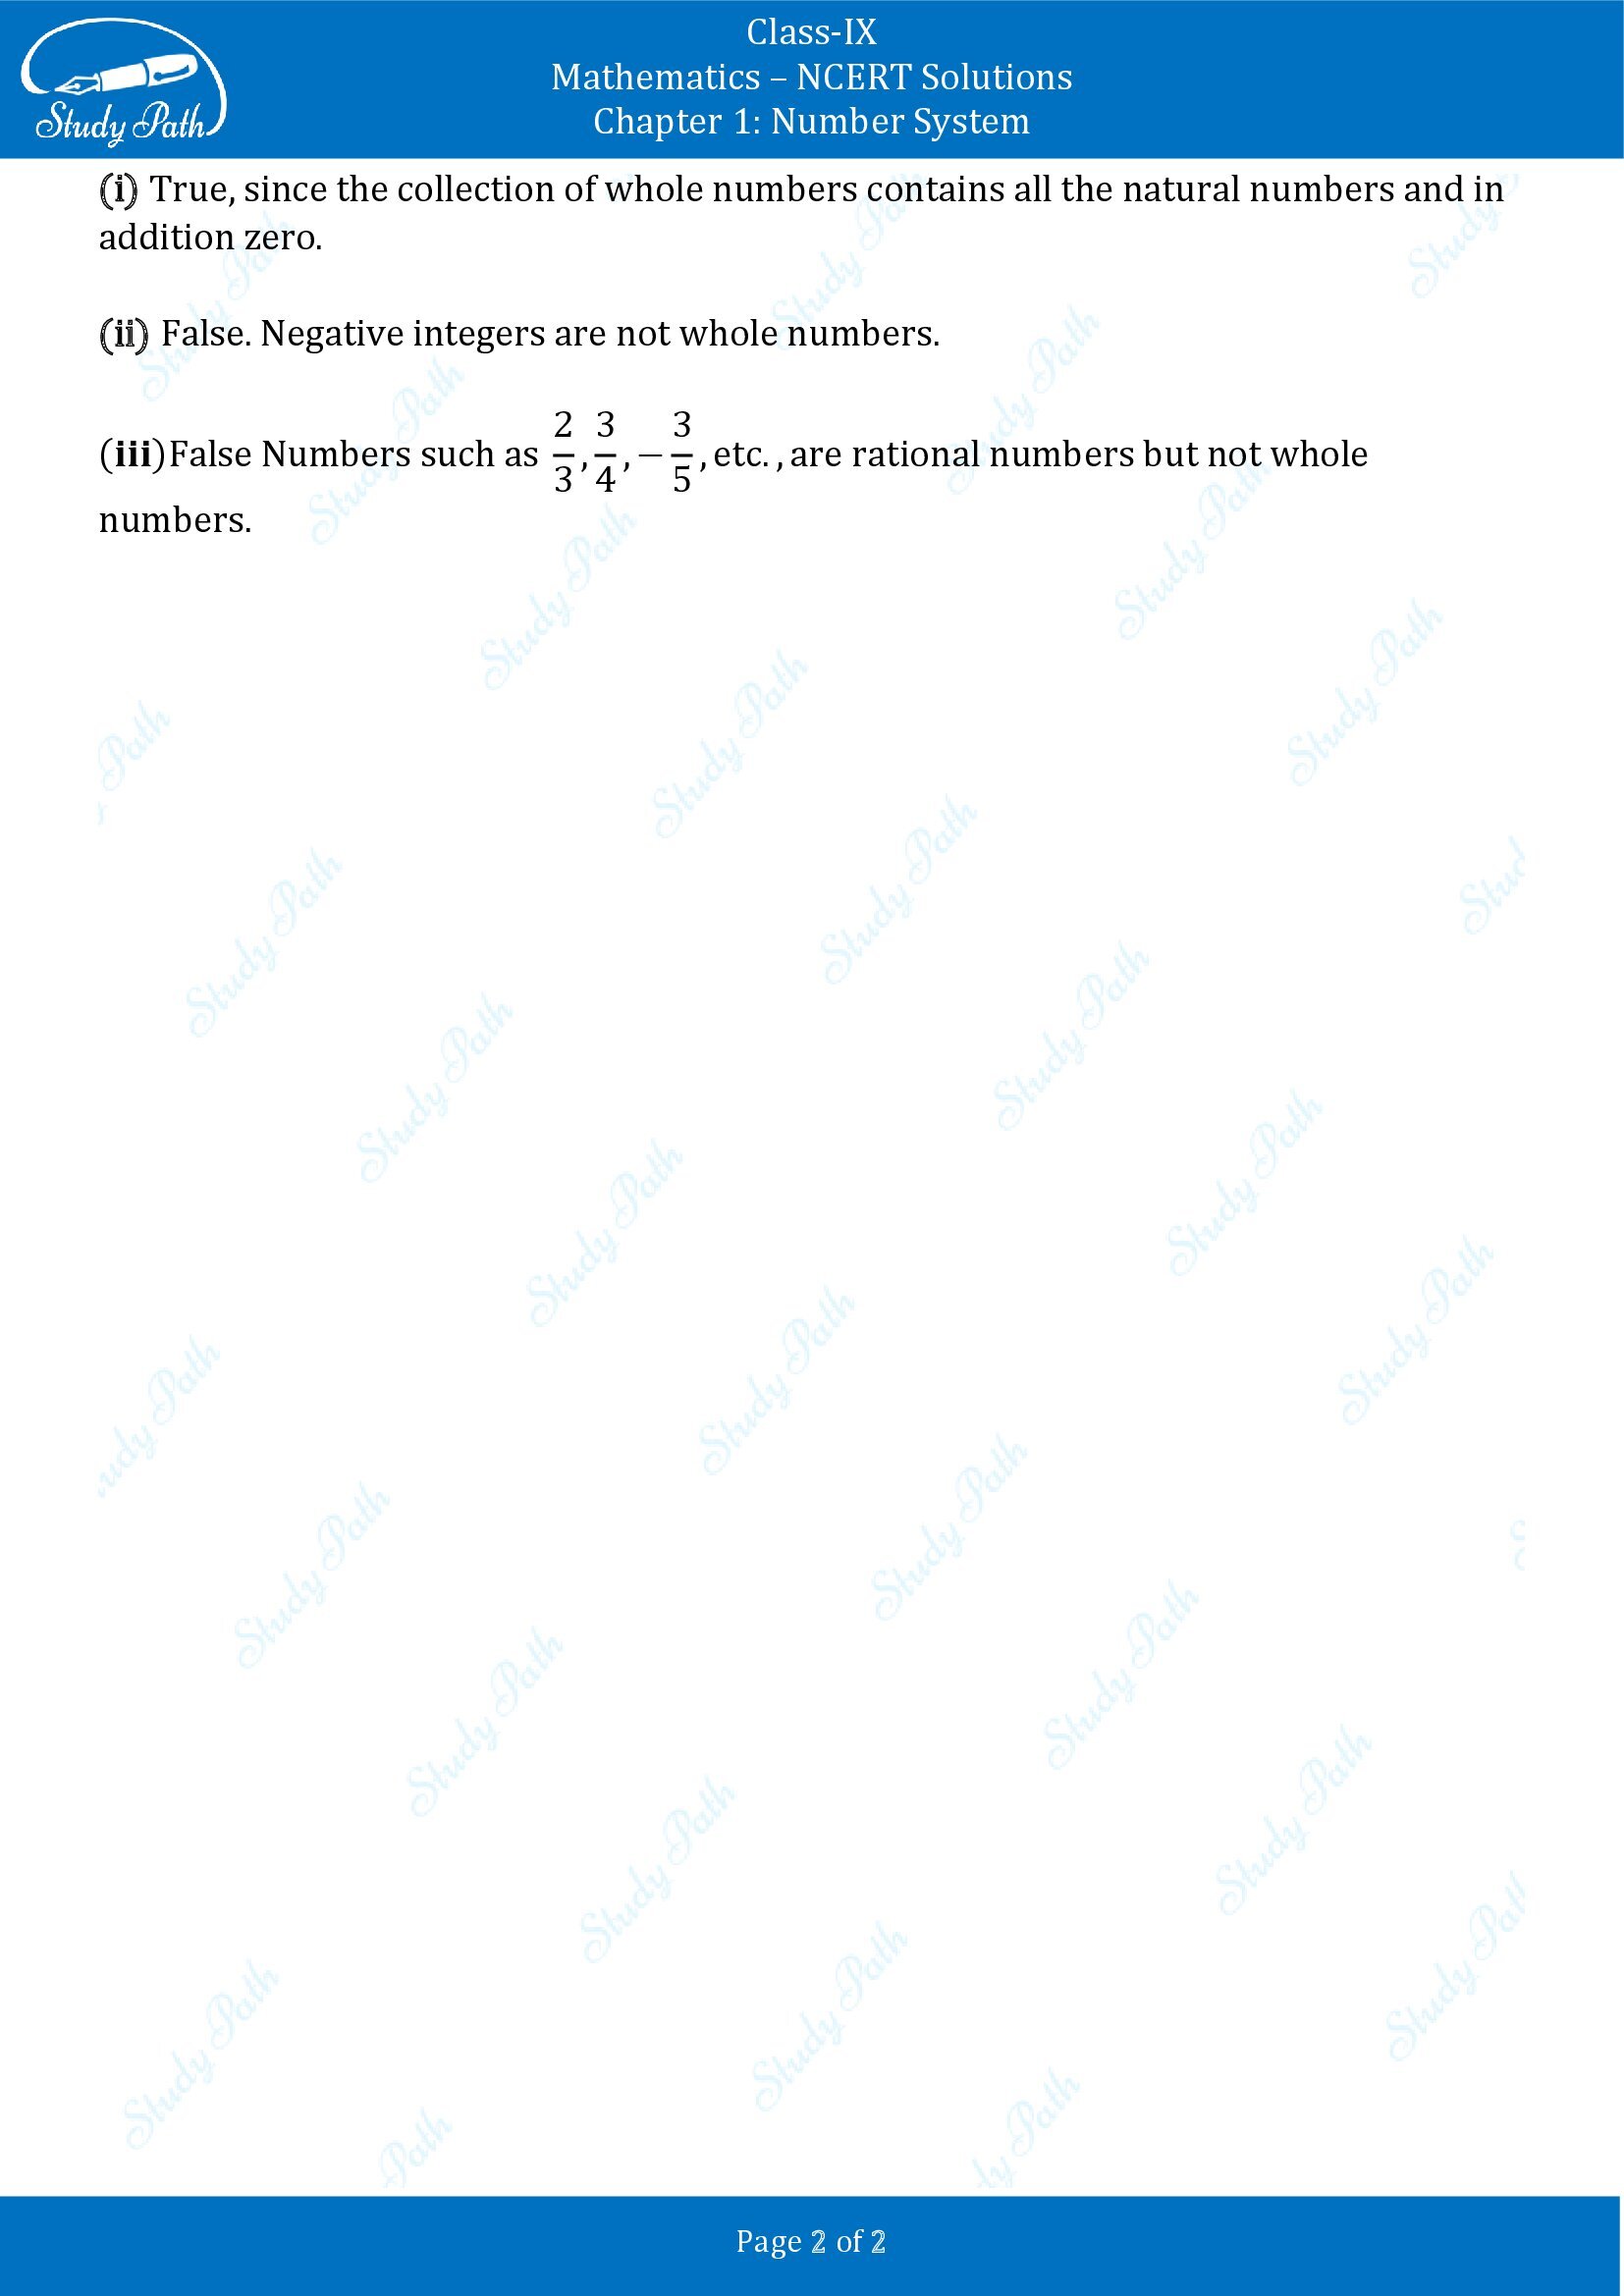 NCERT Solutions for Class 9 Maths Chapter 1 Number System Exercise 1.1 00002